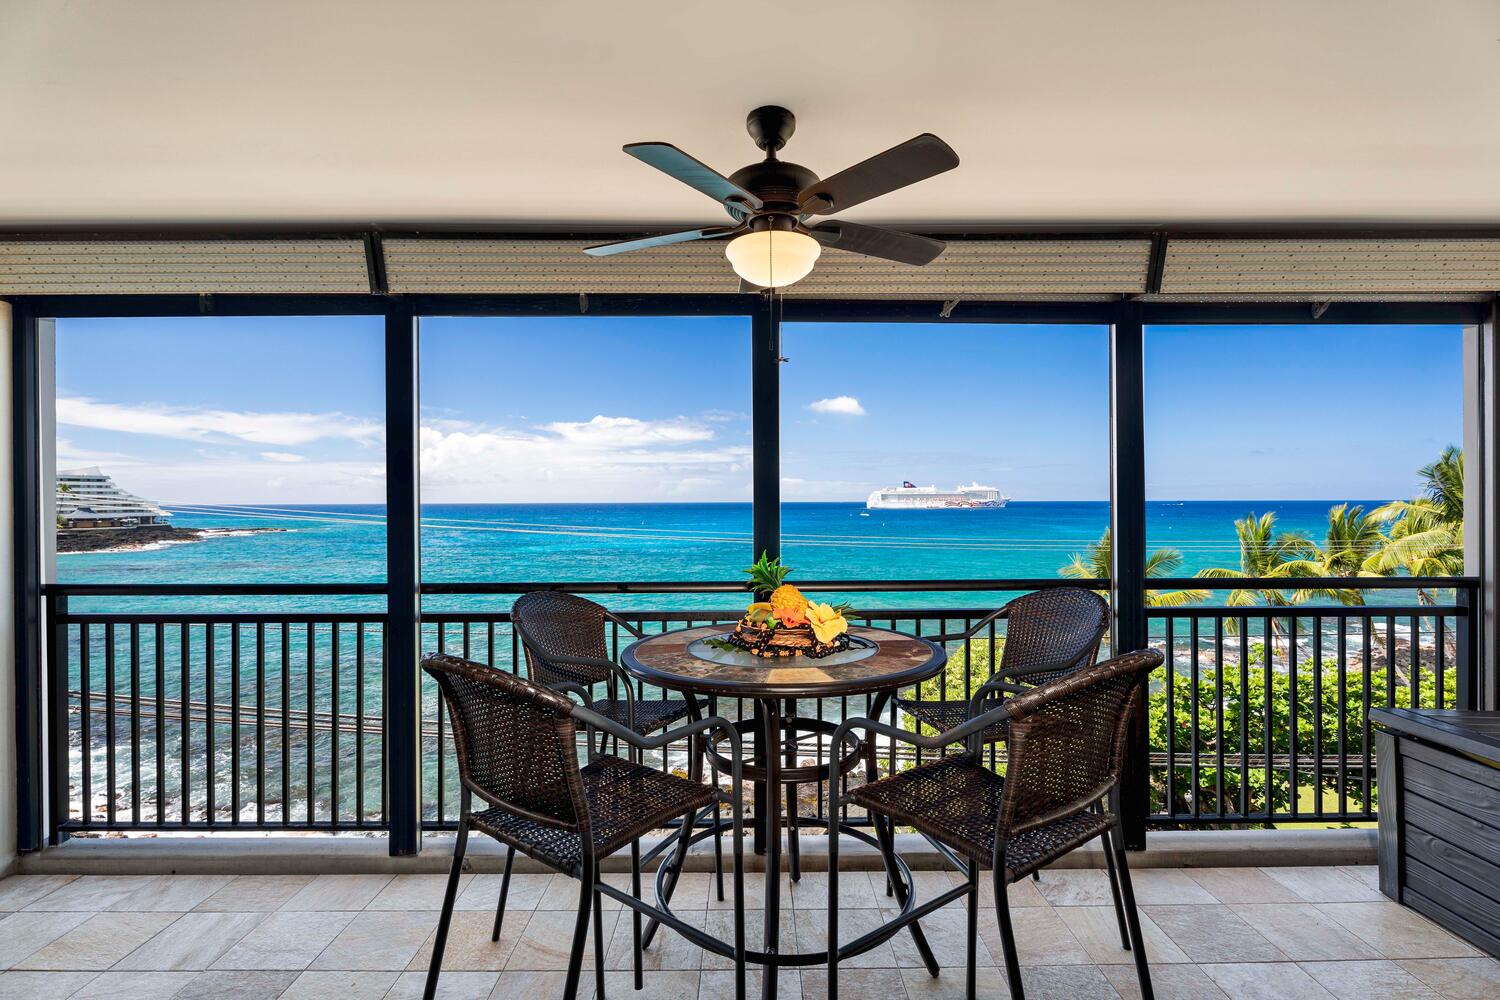 Kailua Kona Vacation Rentals, Kona Alii 403 - Cozy lanai set up for meals with a view of the Pacific.